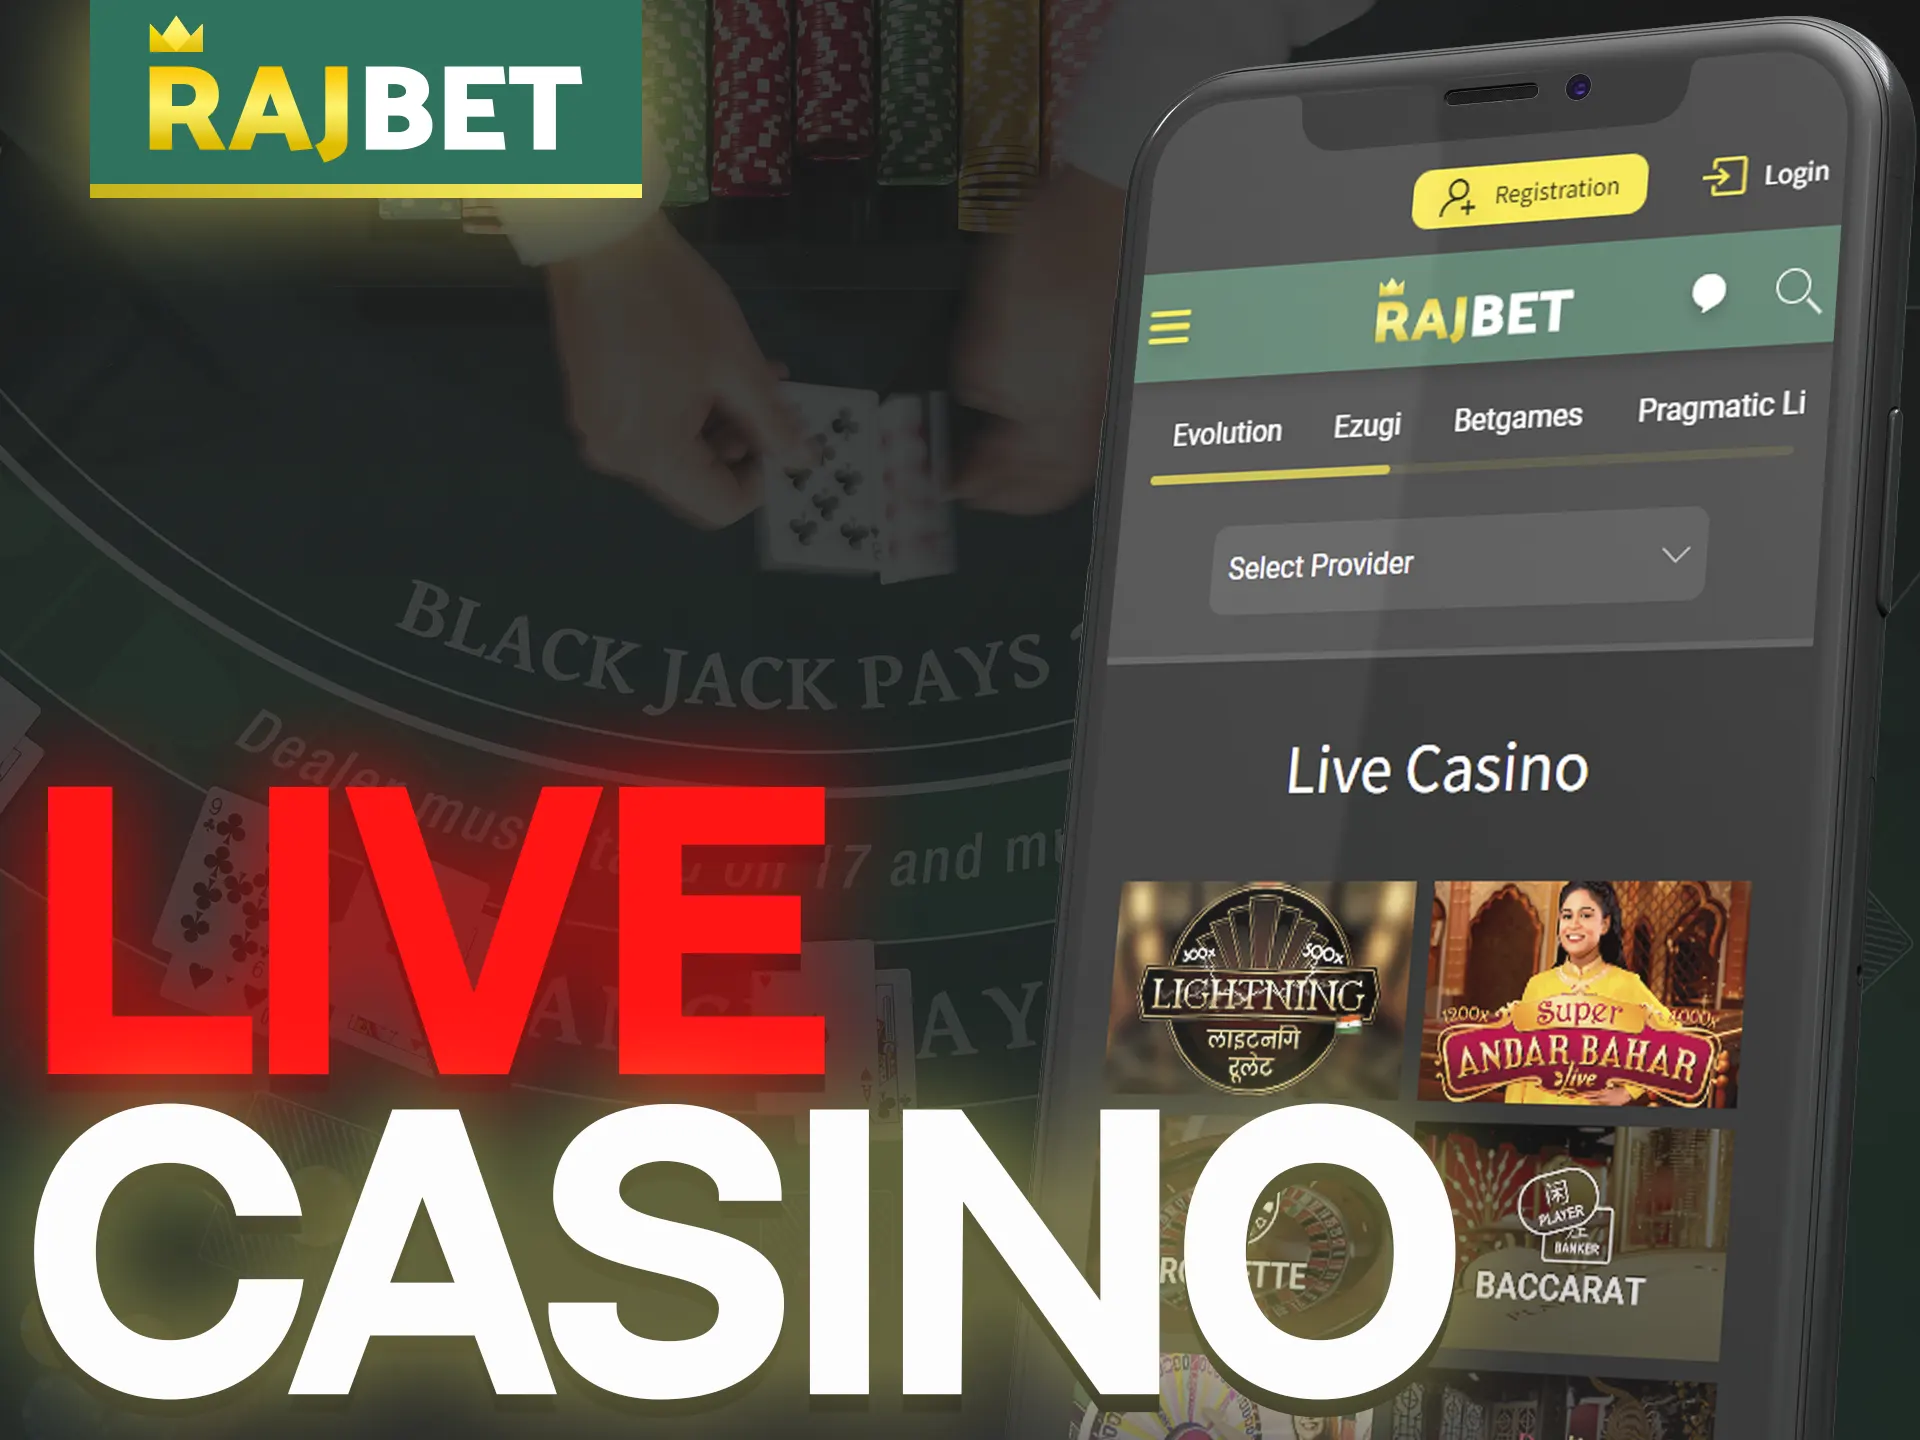 Play with real dealers in the Live Casino section.